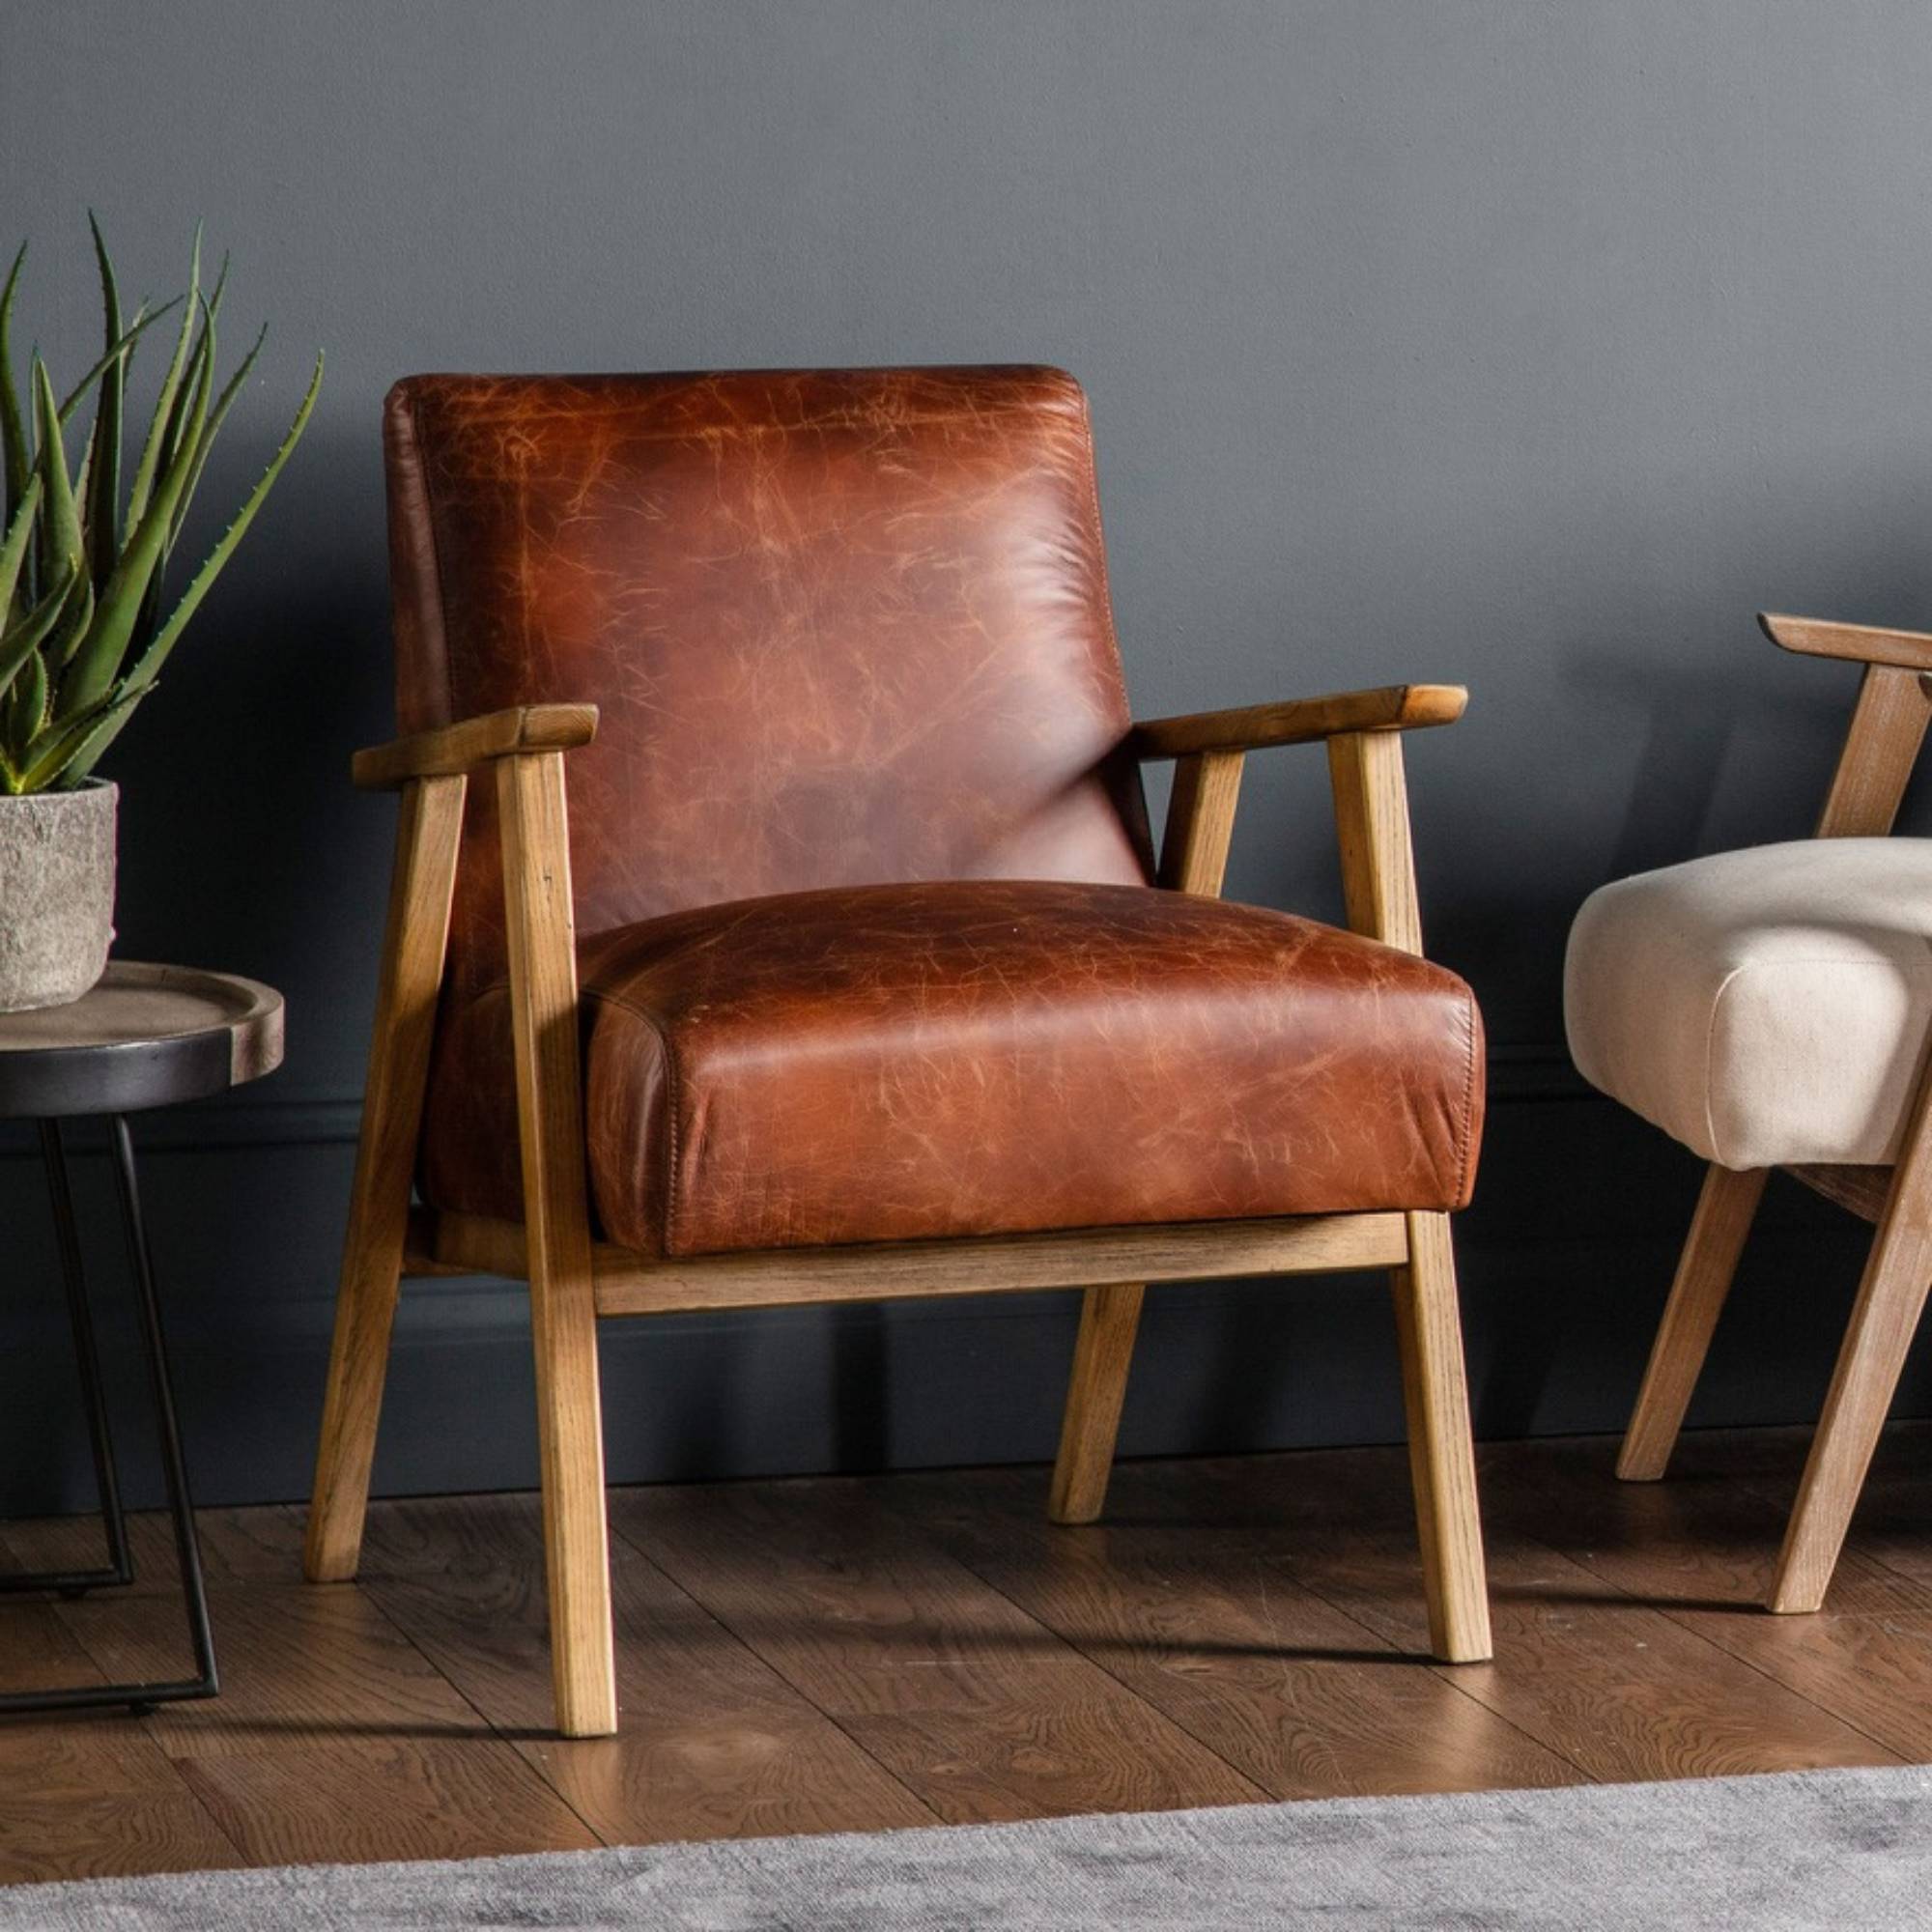 Barret mid century armchair in vintage brown top grain leather with ash wood frame | MalletandPlane.com